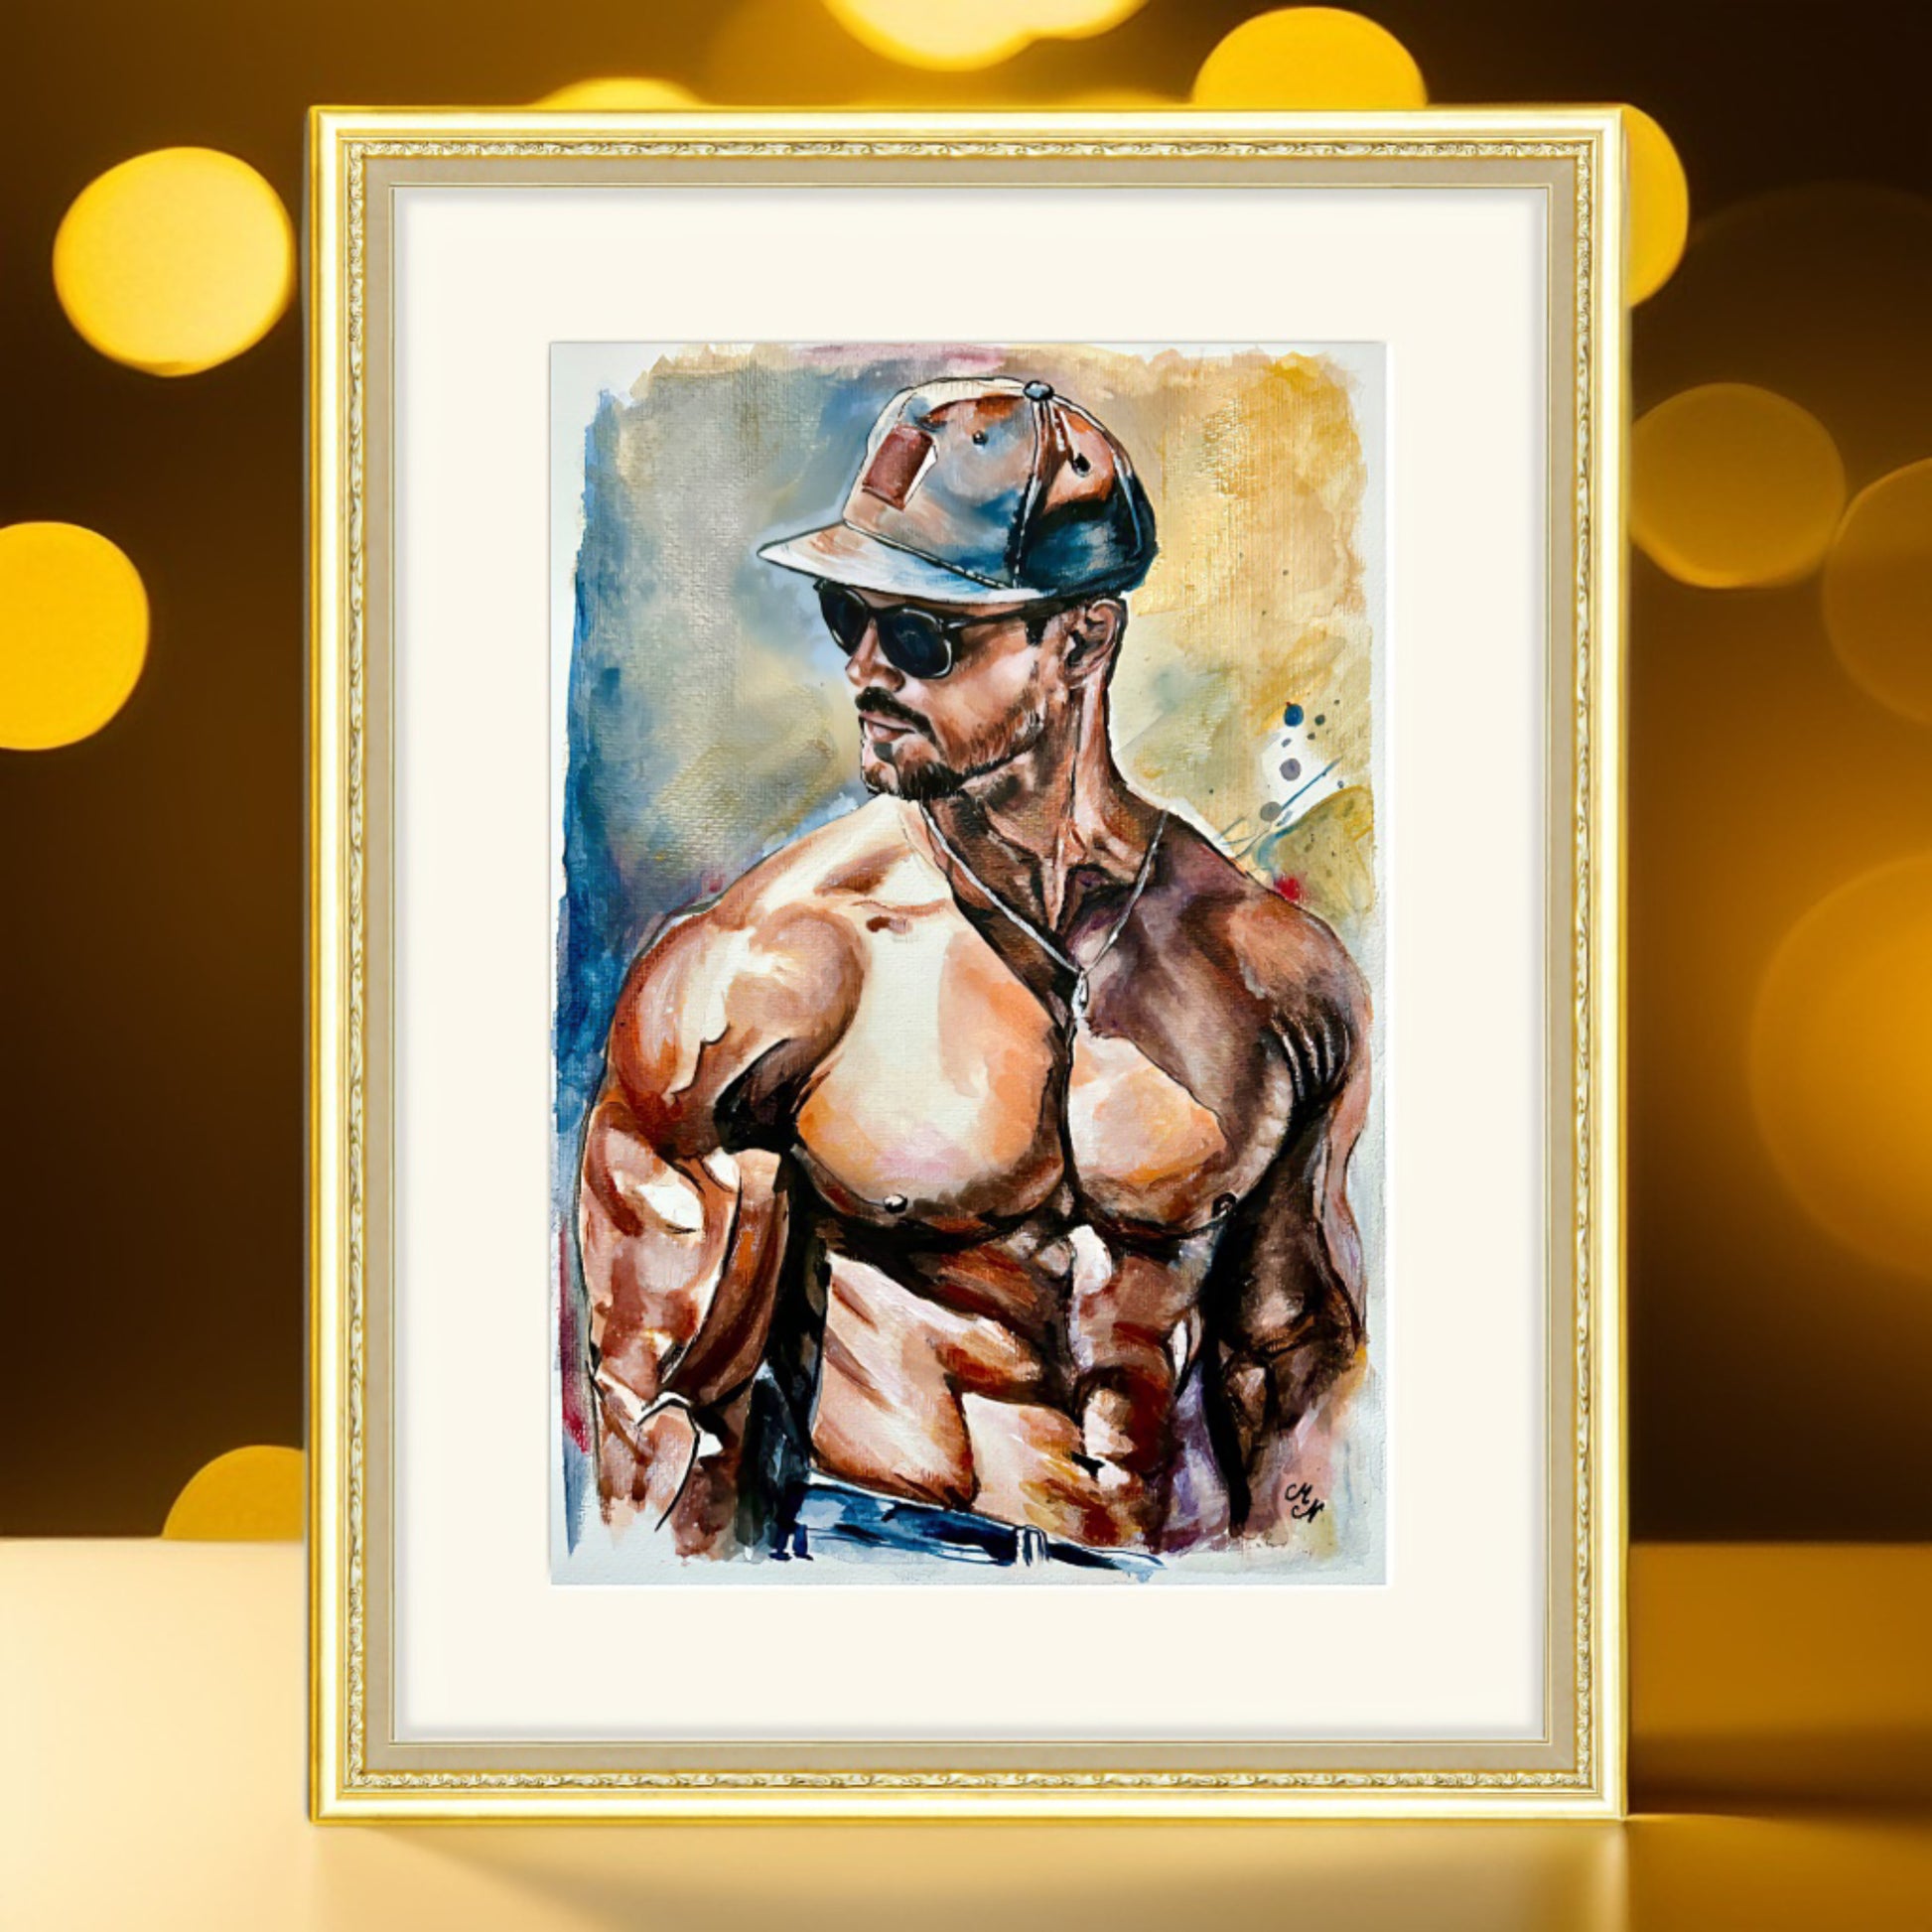 Painting of a man with well-defined muscles